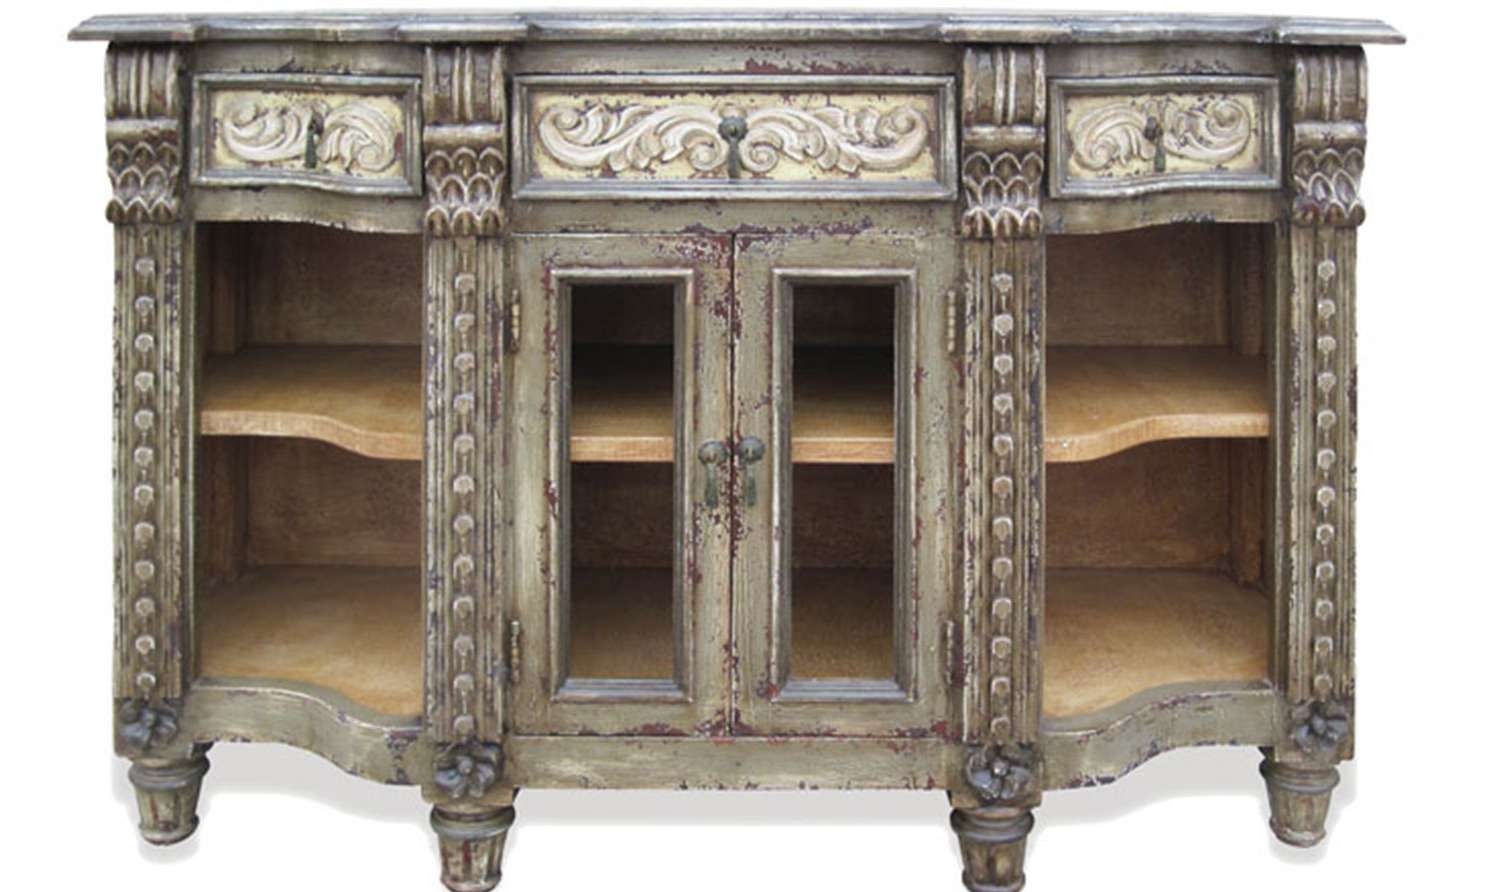 Hand Painted French Sideboard Grey Distressed Old World Hand Carved Within Magic The Gathering Sideboards (View 18 of 24)